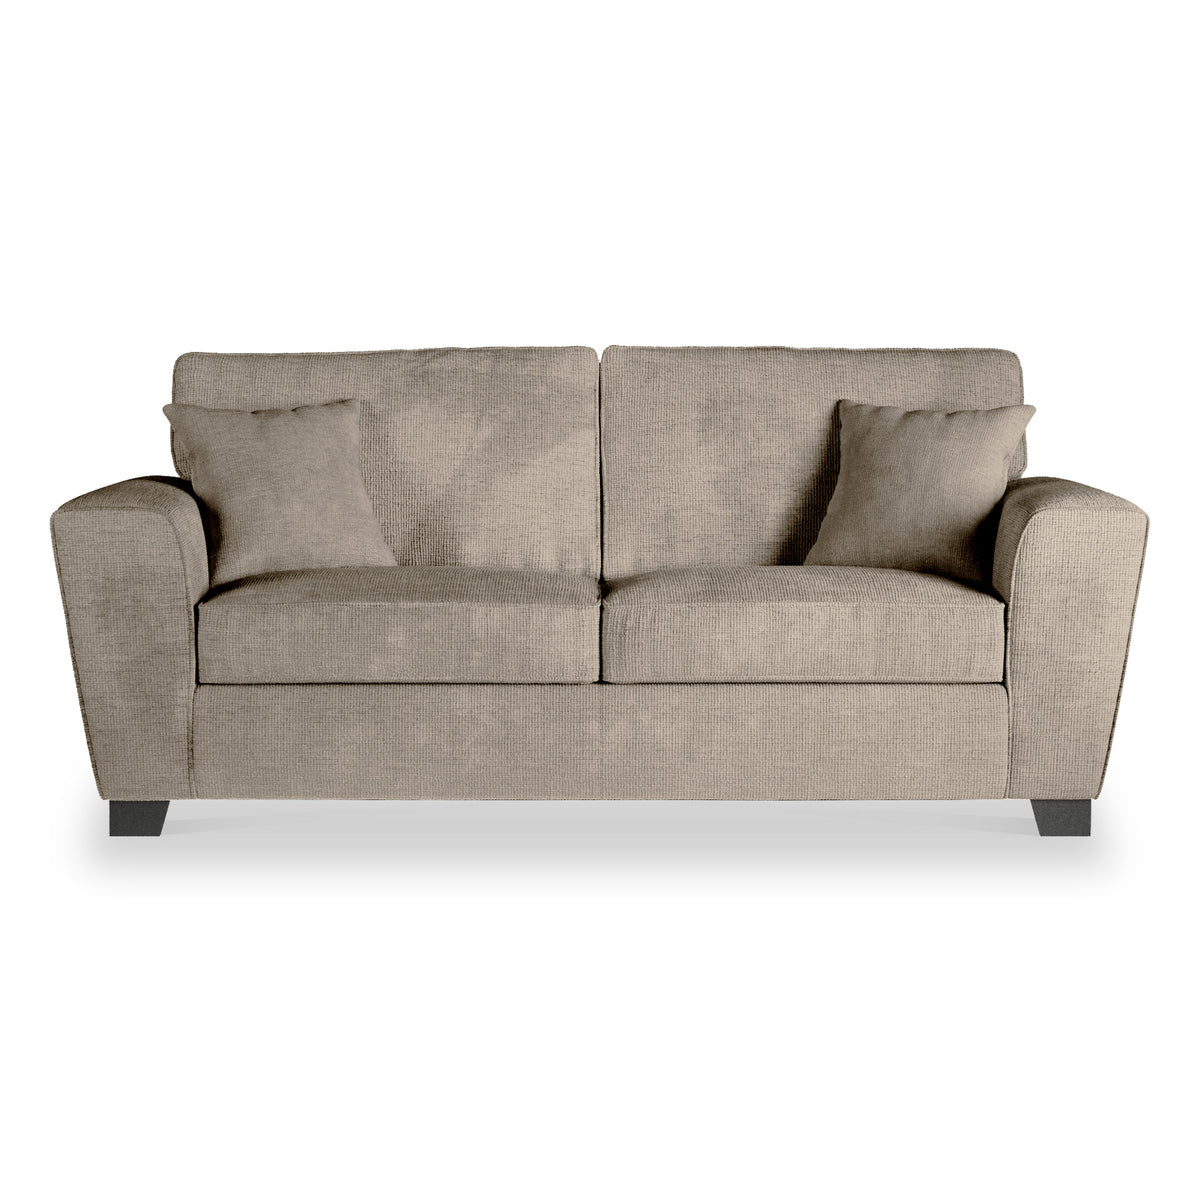 Chester Mocha Hopsack 3 Seater Couch